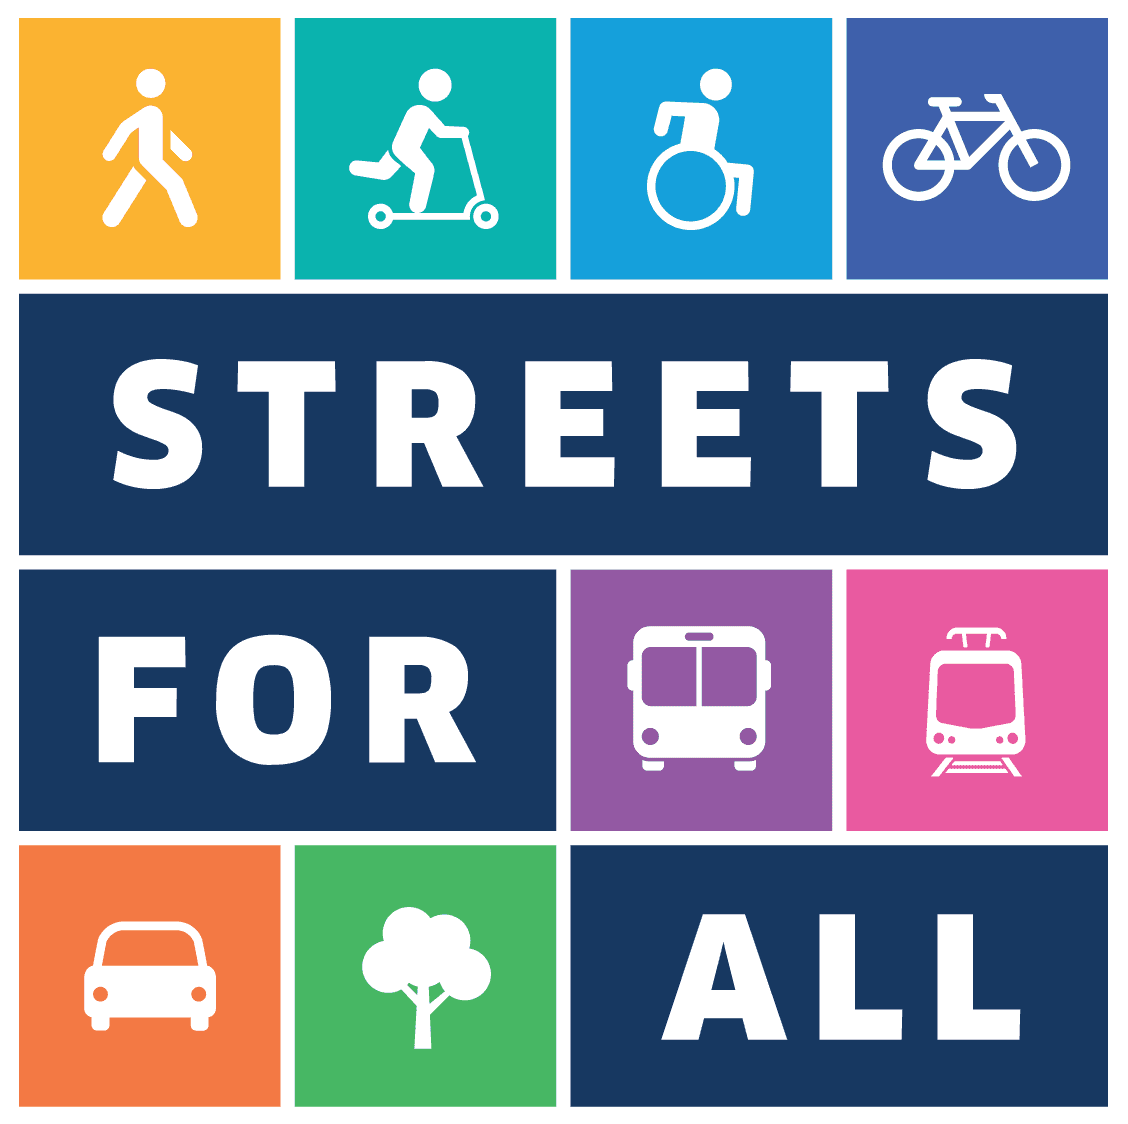 Streets For All logo